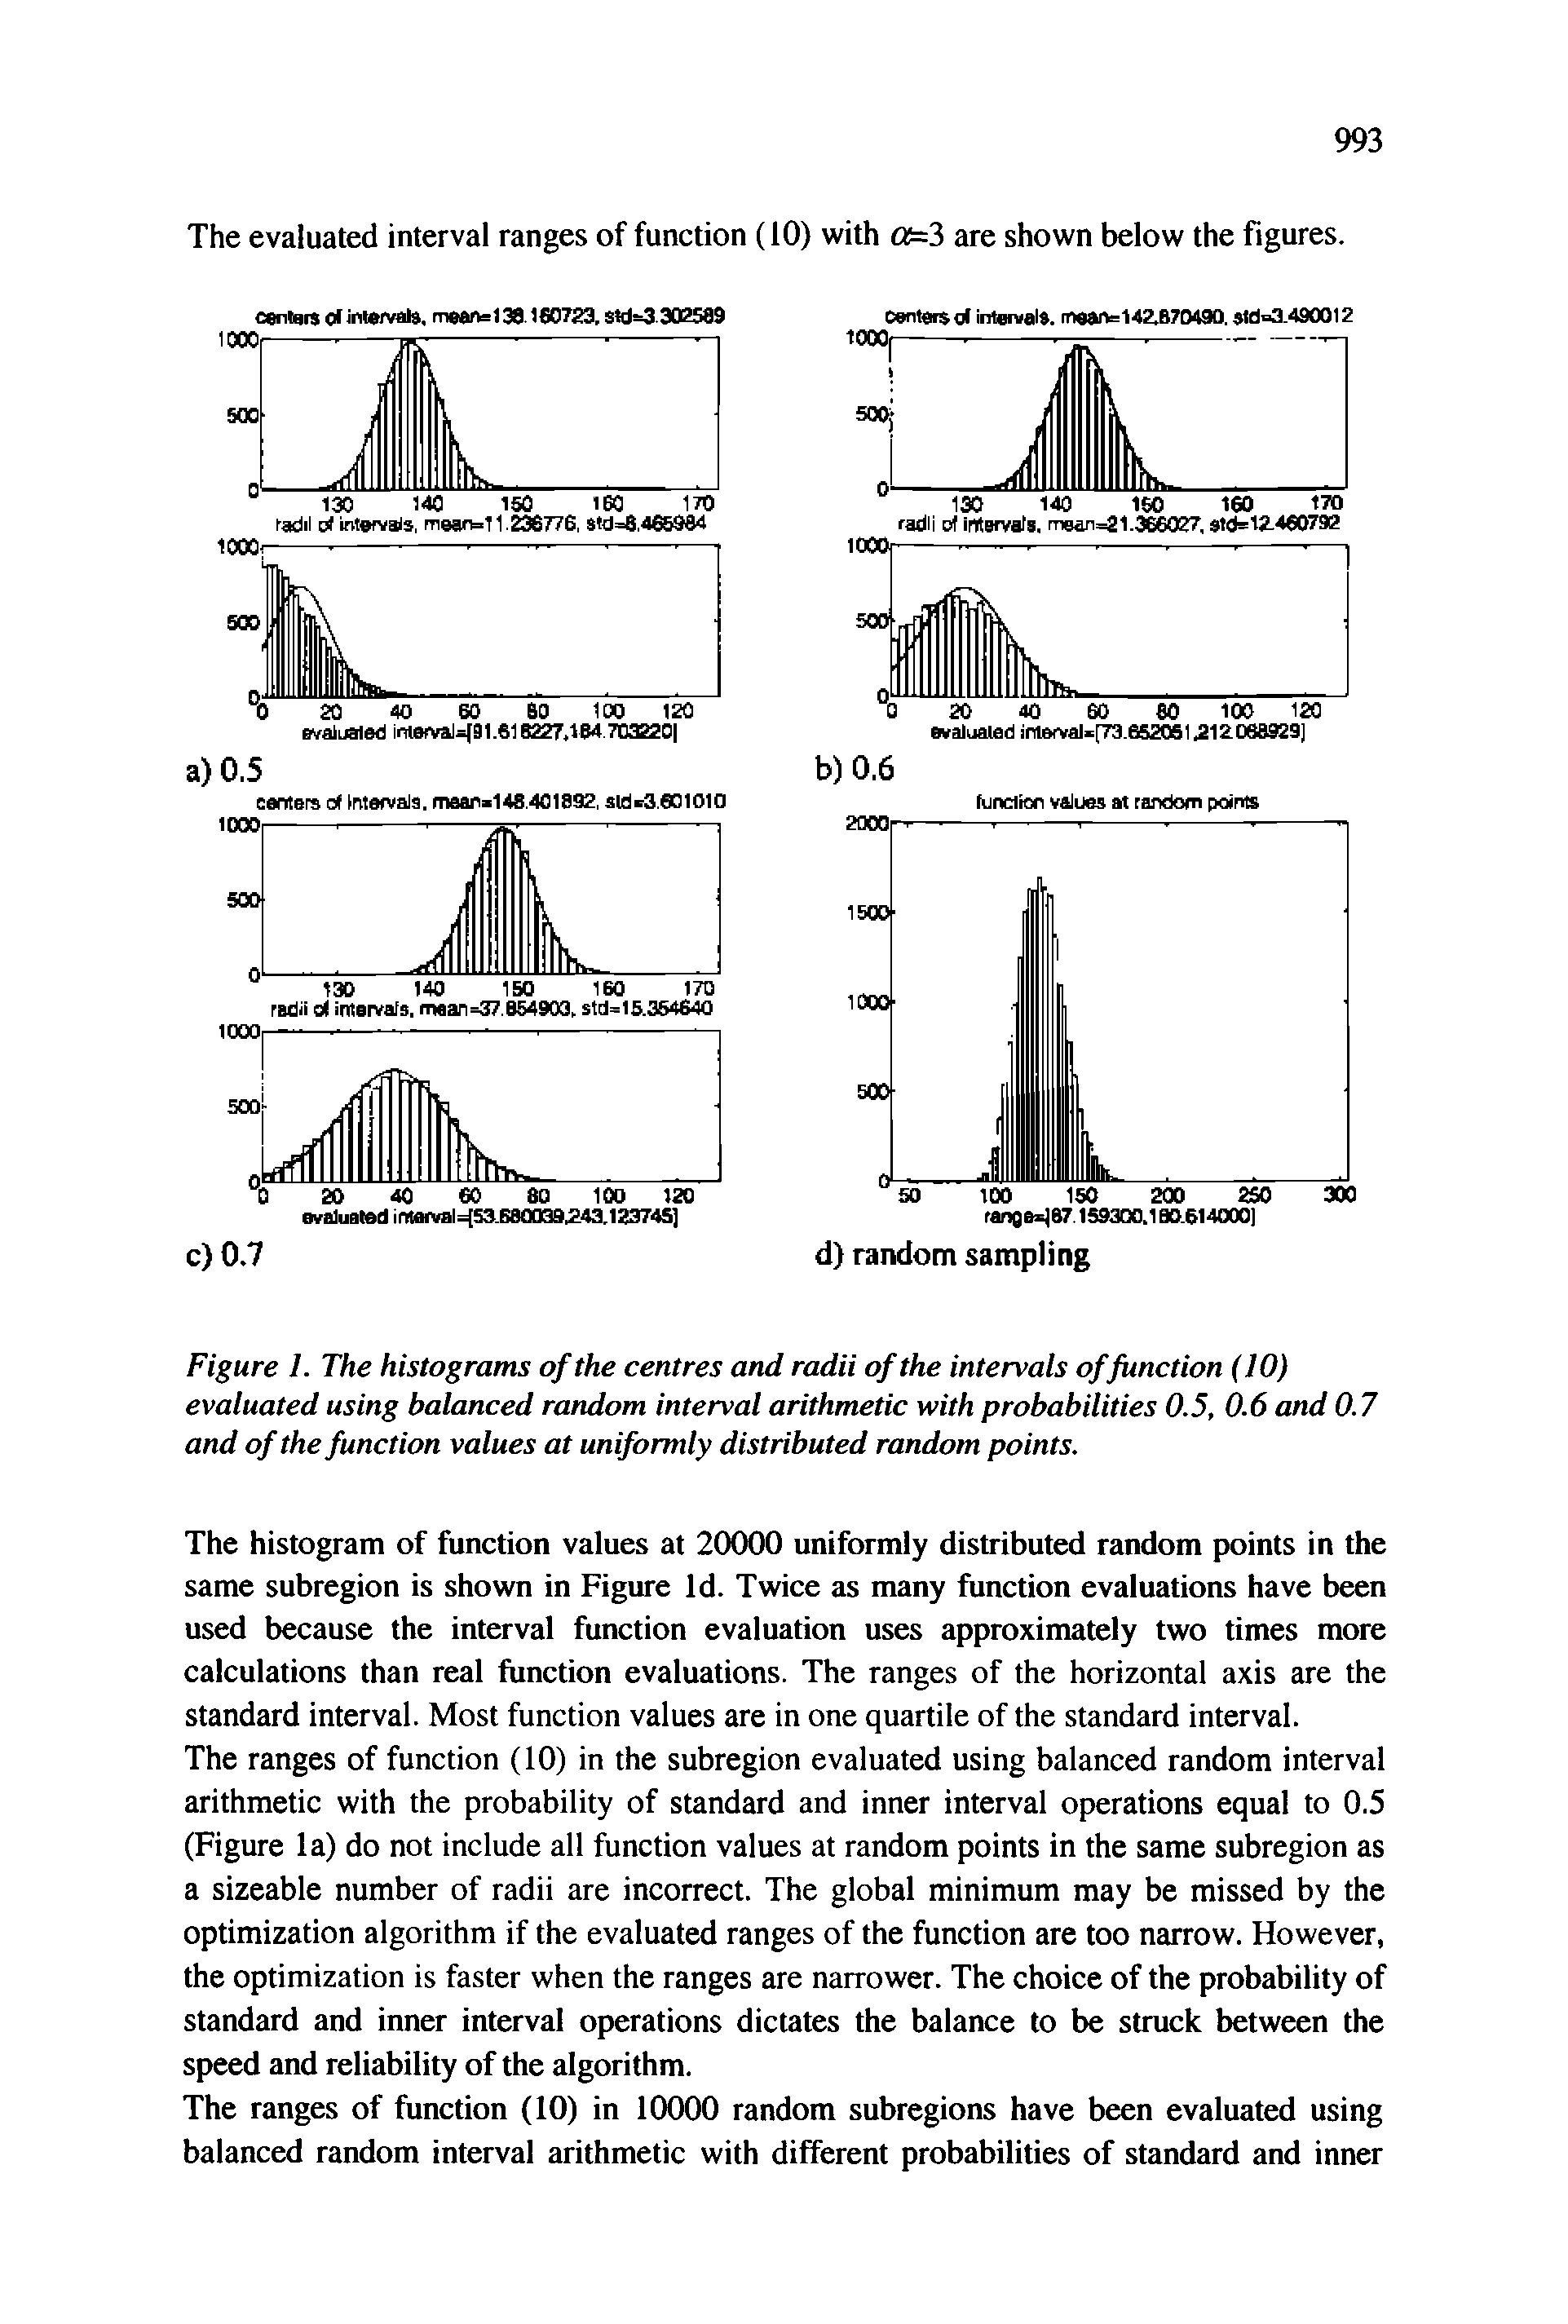 Figure I. The histograms of the centres and radii of the intervals offunction (10) evaluated using balanced random interval arithmetic with probabilities 0.5, 0.6 and 0.7 and of the function values at uniformly distributed random points.